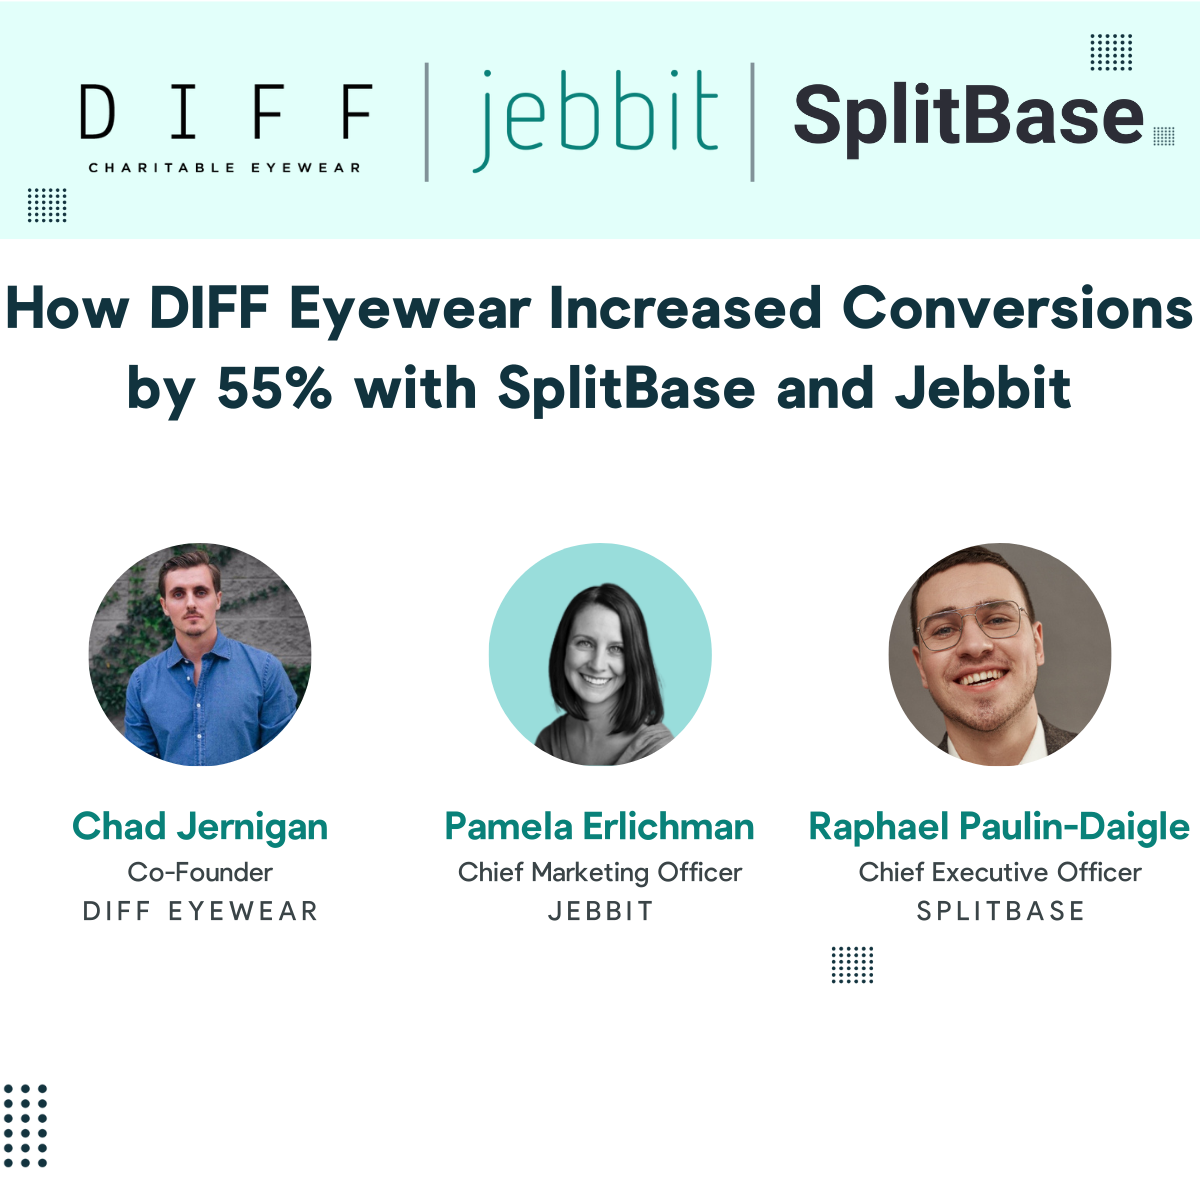 How DIFF Eyewear Increased Conversions by 55% with SplitBase and Jebbit